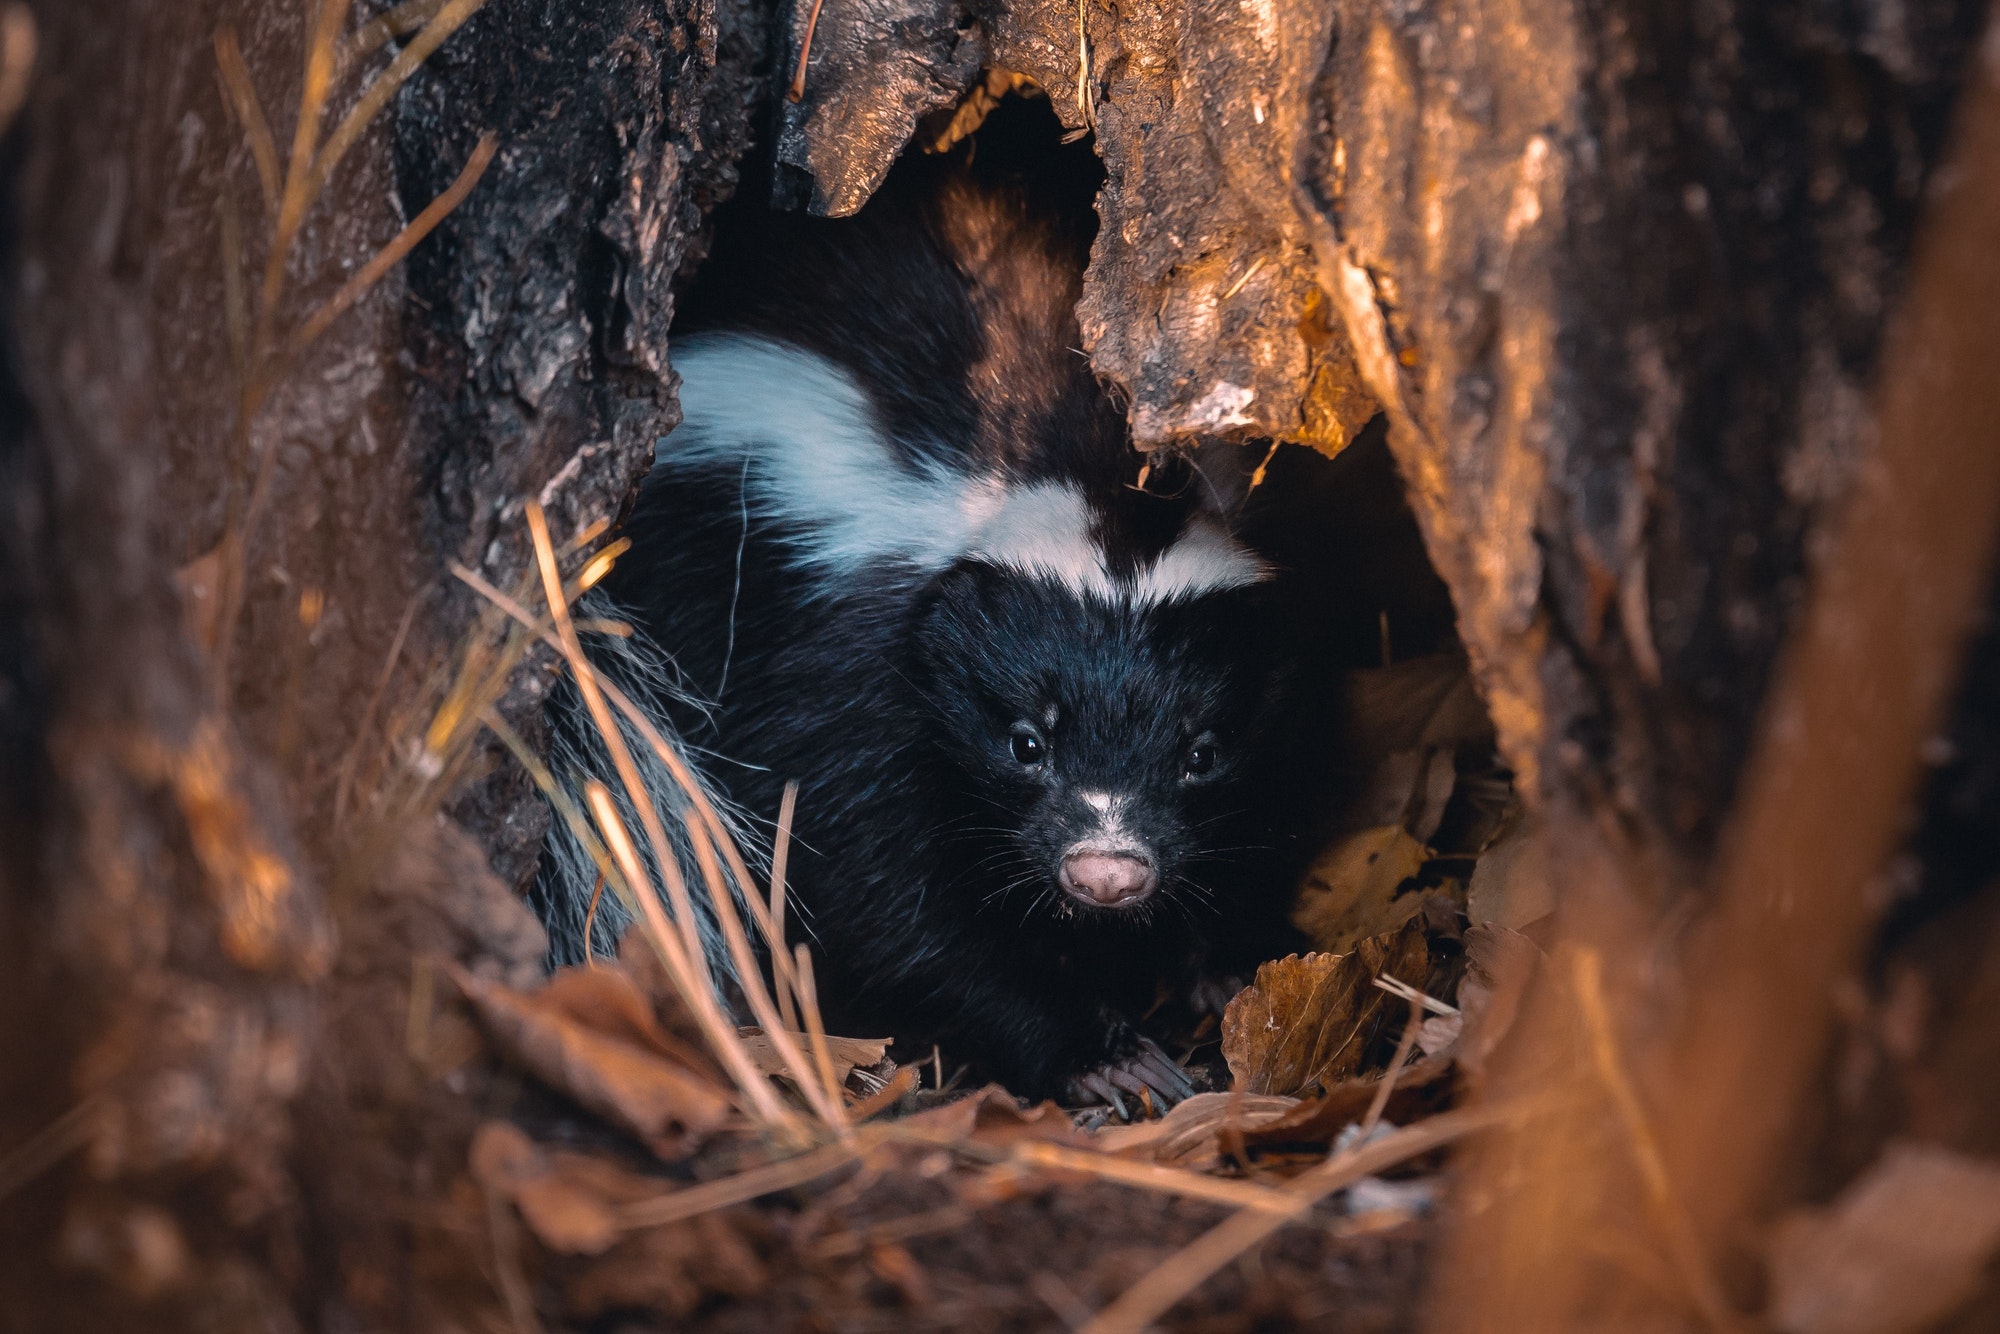 Cute black and white skunk hiding in a cave in Argentina